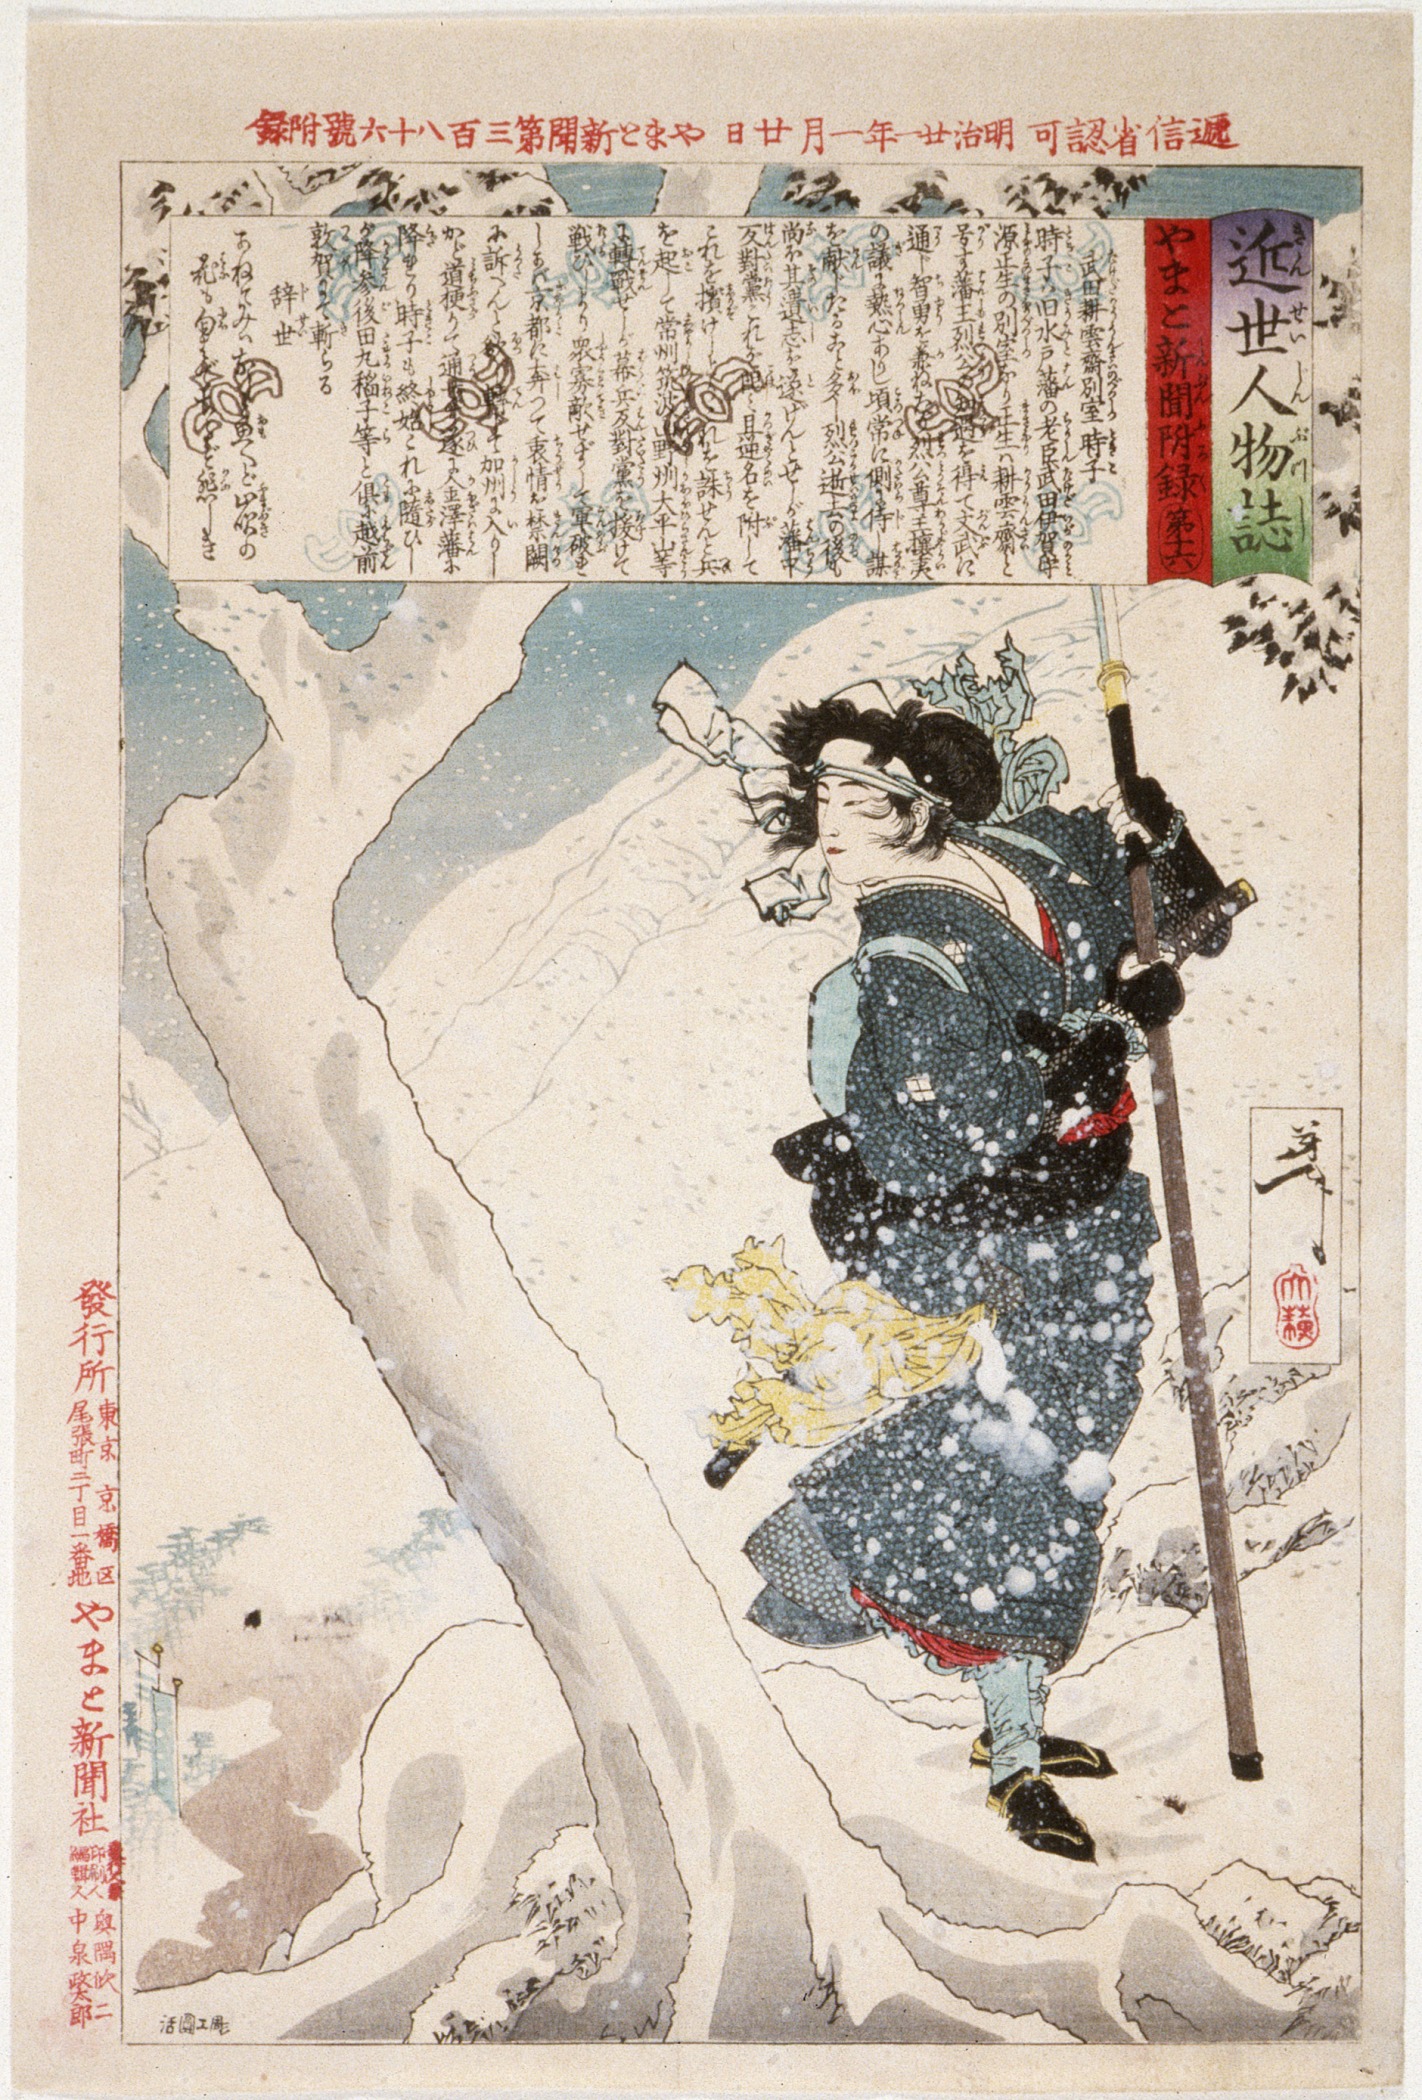 an oriental painting shows a young man dressed in a snow suit holding a sword